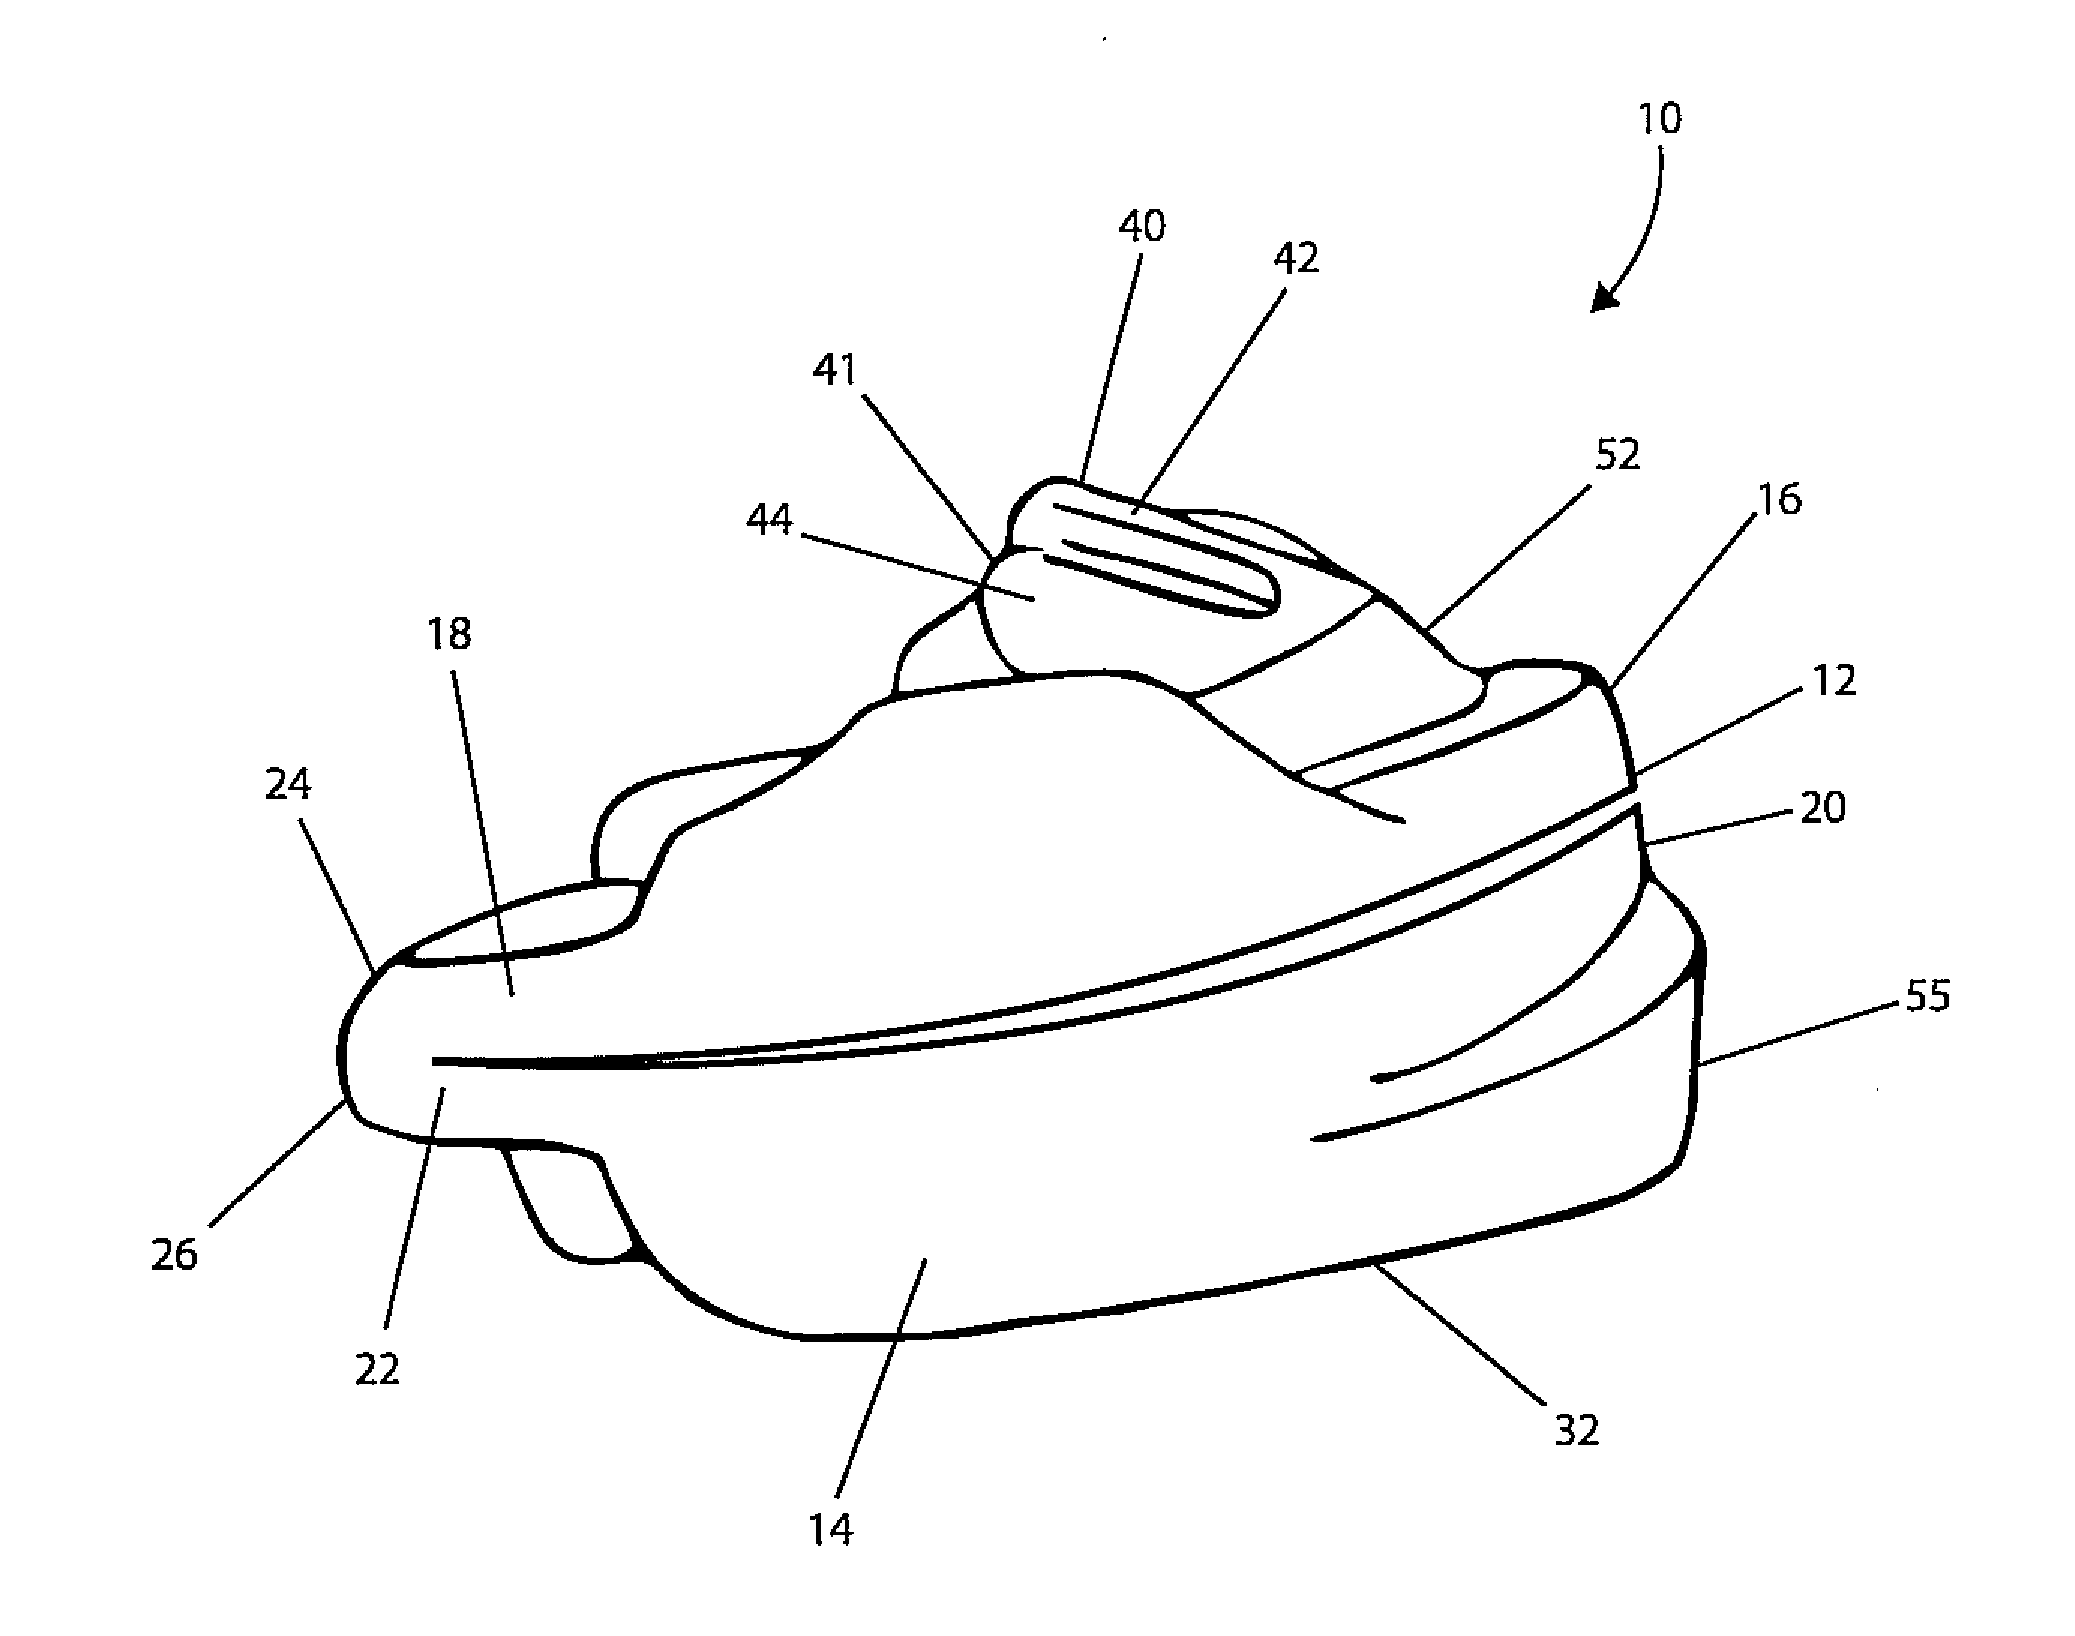 Oral appliance, system and method for correcting class iii problems of mandibular prognathism